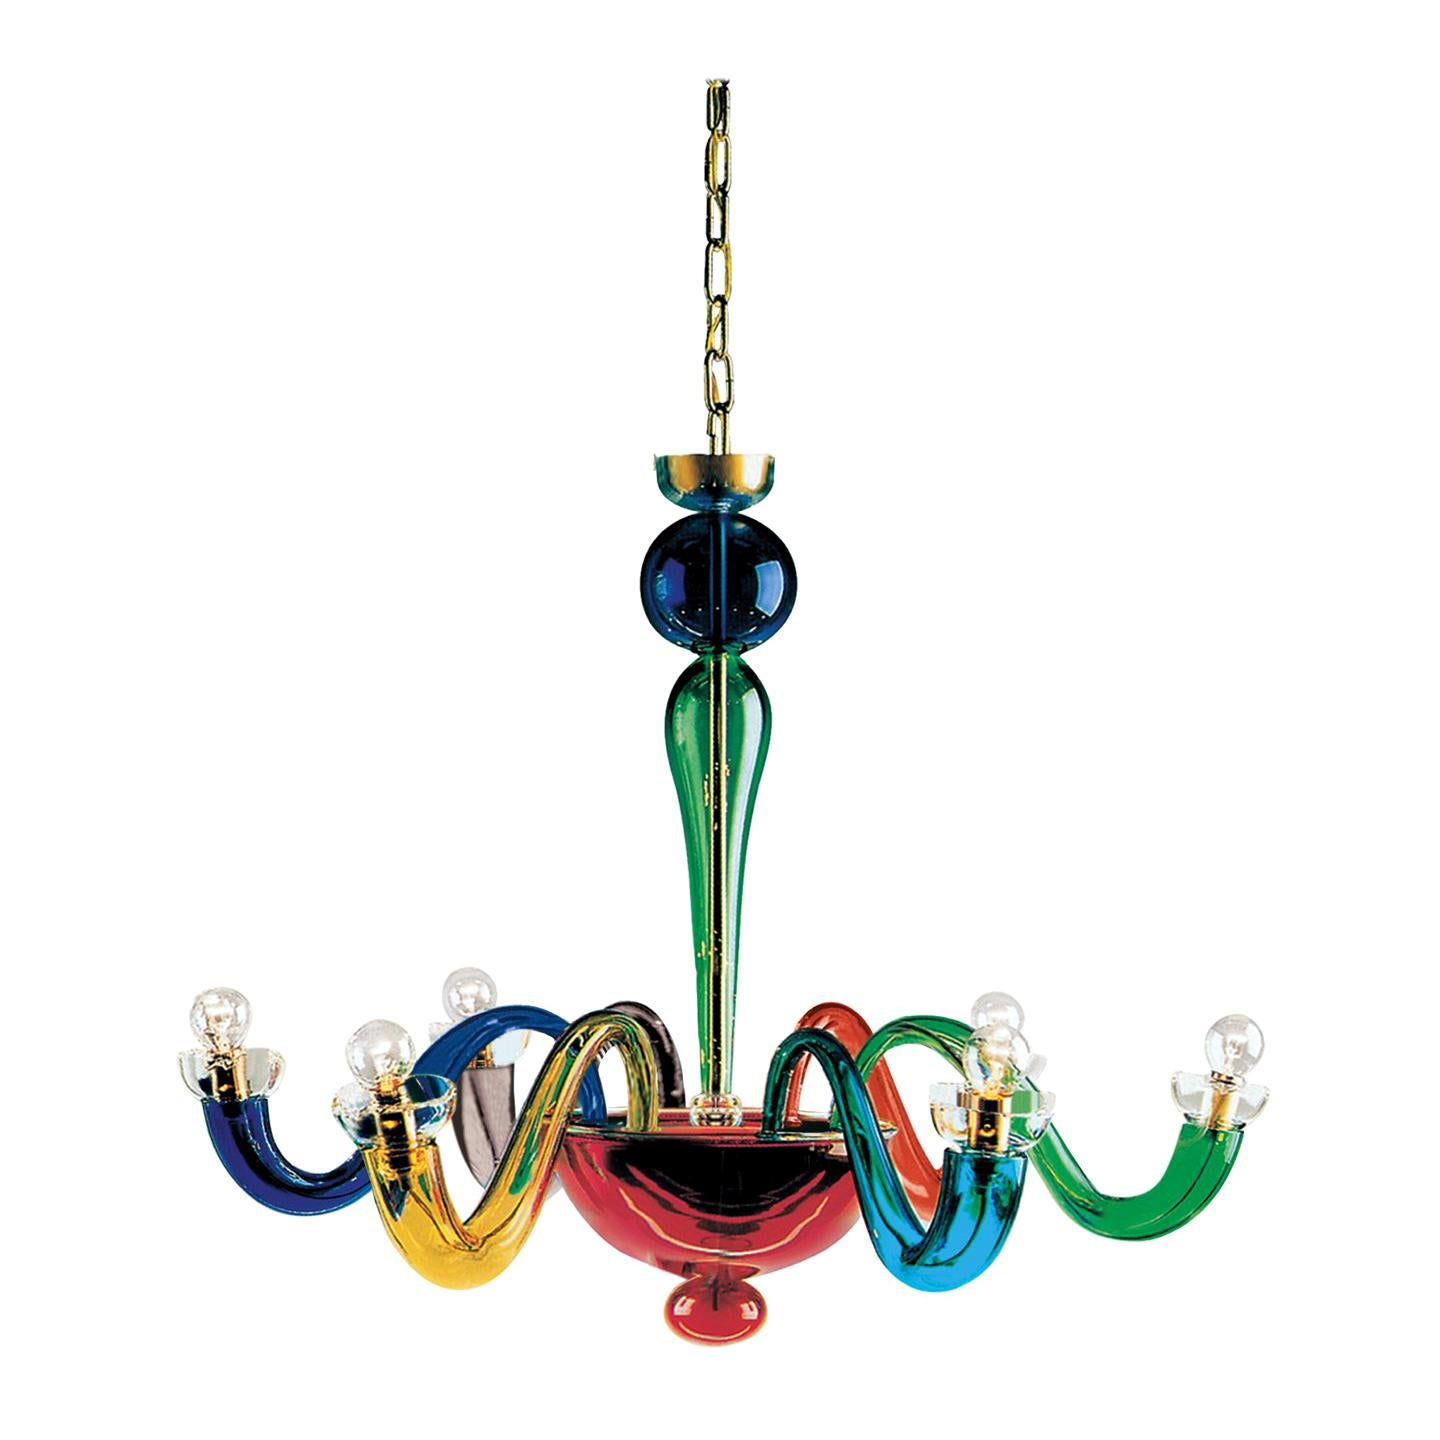 The Serenisima chandelier is a colorful lamp that perfectly mixes history, handmade craftsmanship and playfulness. Serenisima’s design comes from the historical archives of Leucos and is an iconic example of bright, colorful Venetian glass used in a